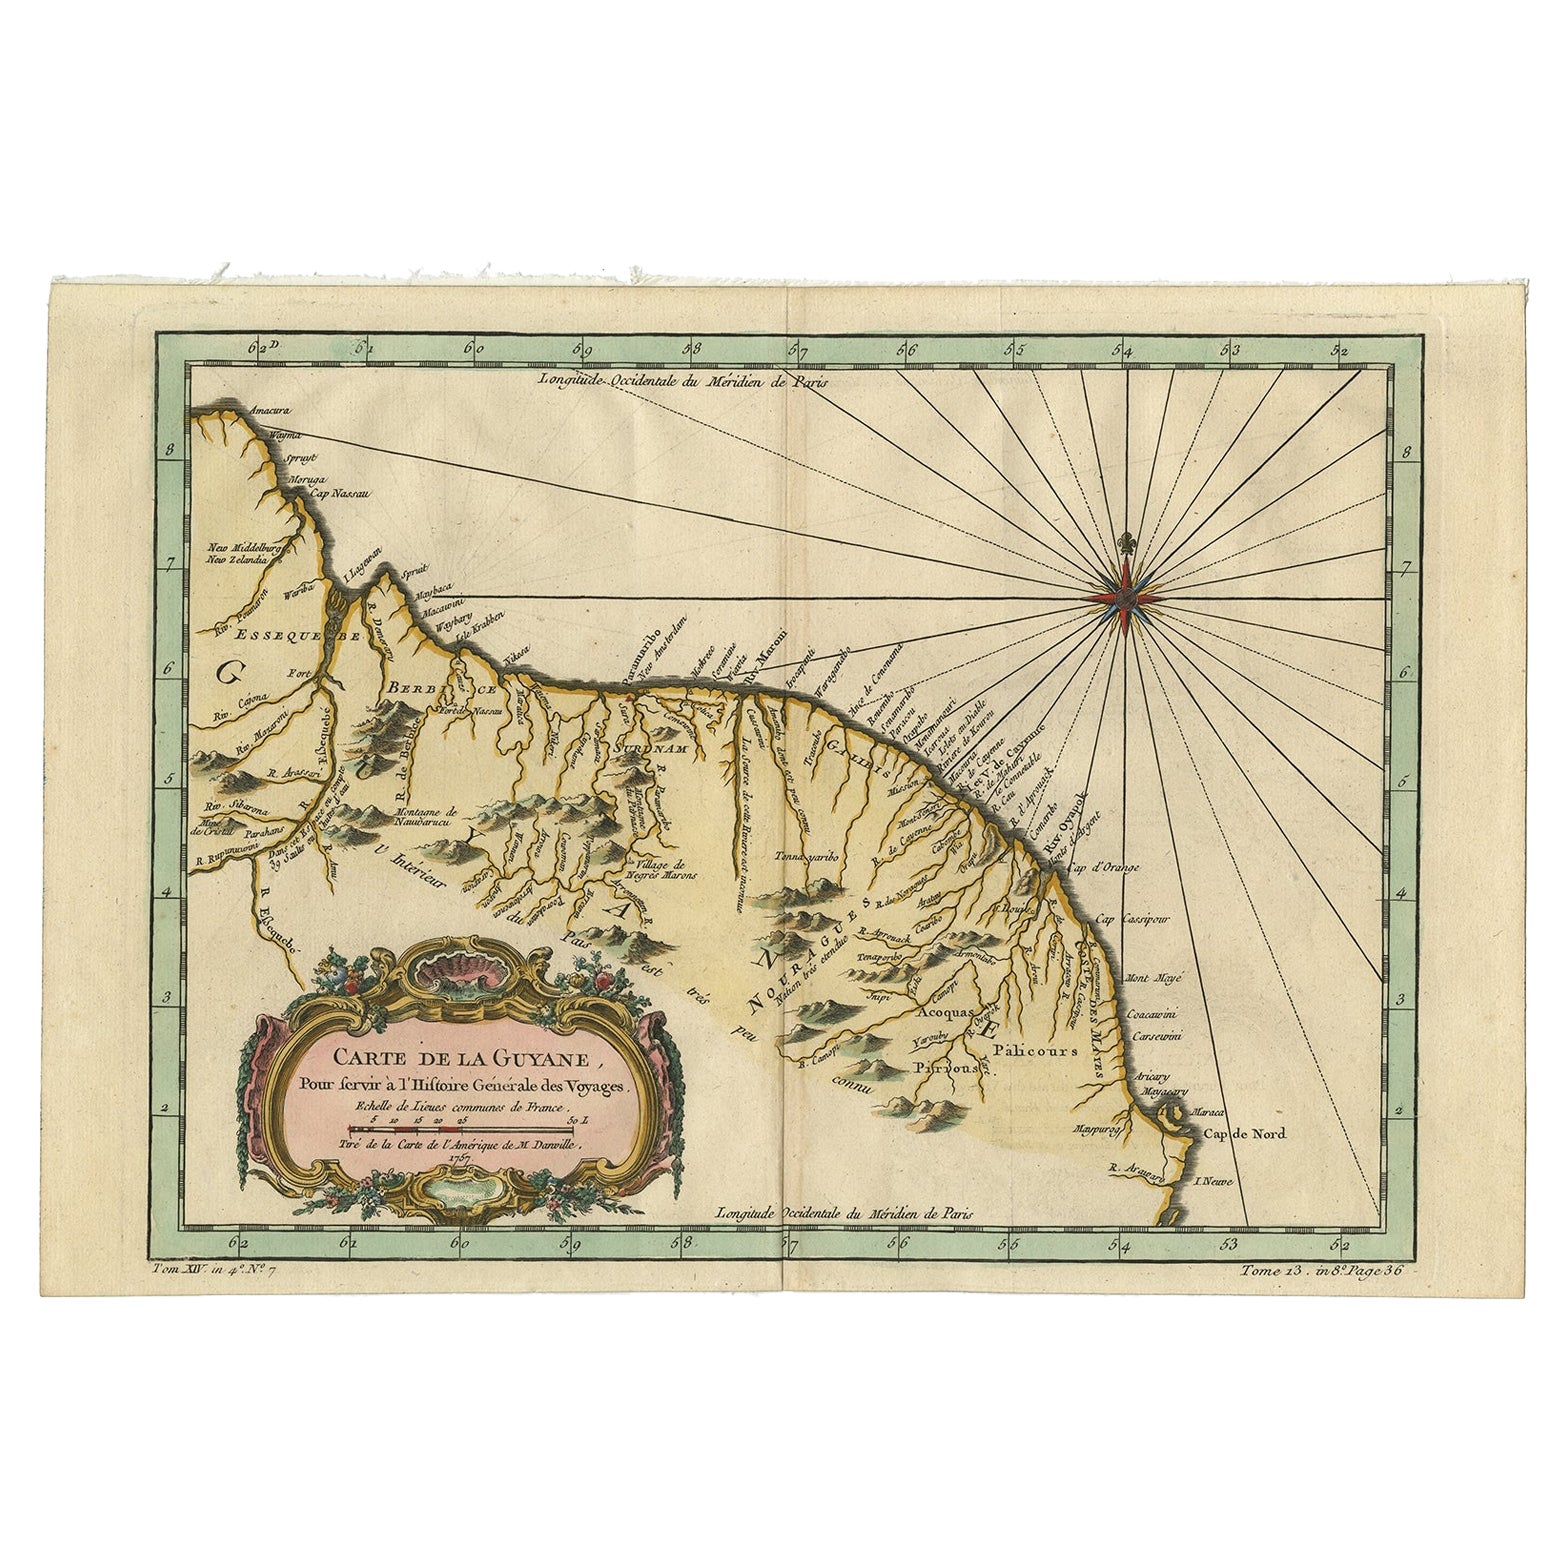 Old Map of Guyana, Suriname and French Guiana with Paramaribo and Cayenne, c1760 For Sale